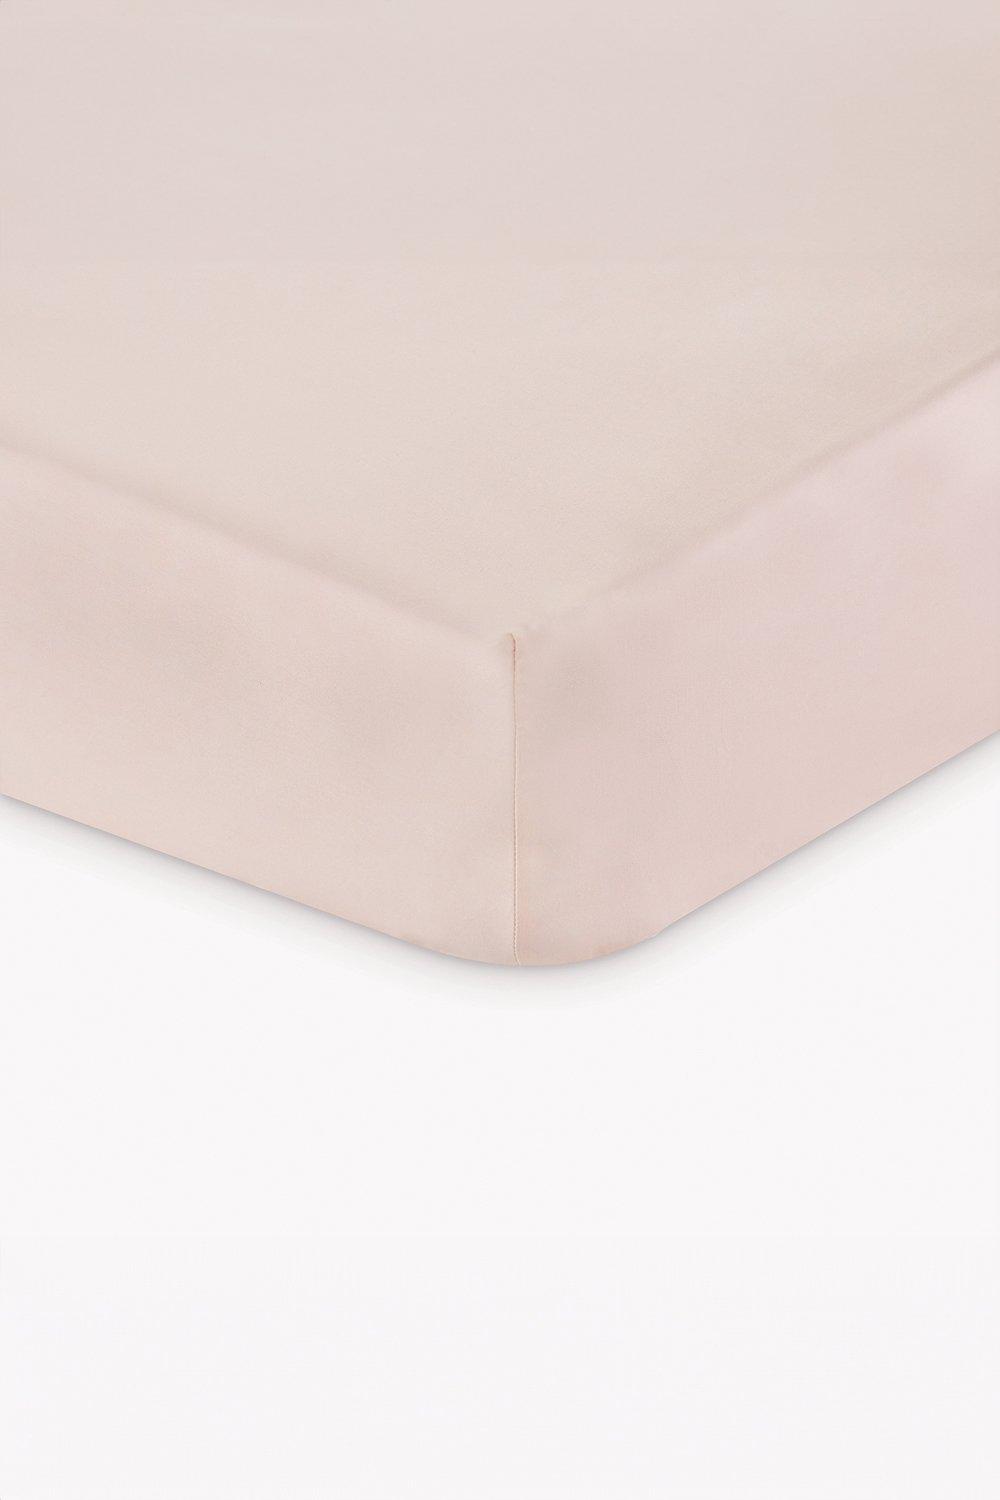 'Egyptian Cotton 600TC' Fitted Sheet